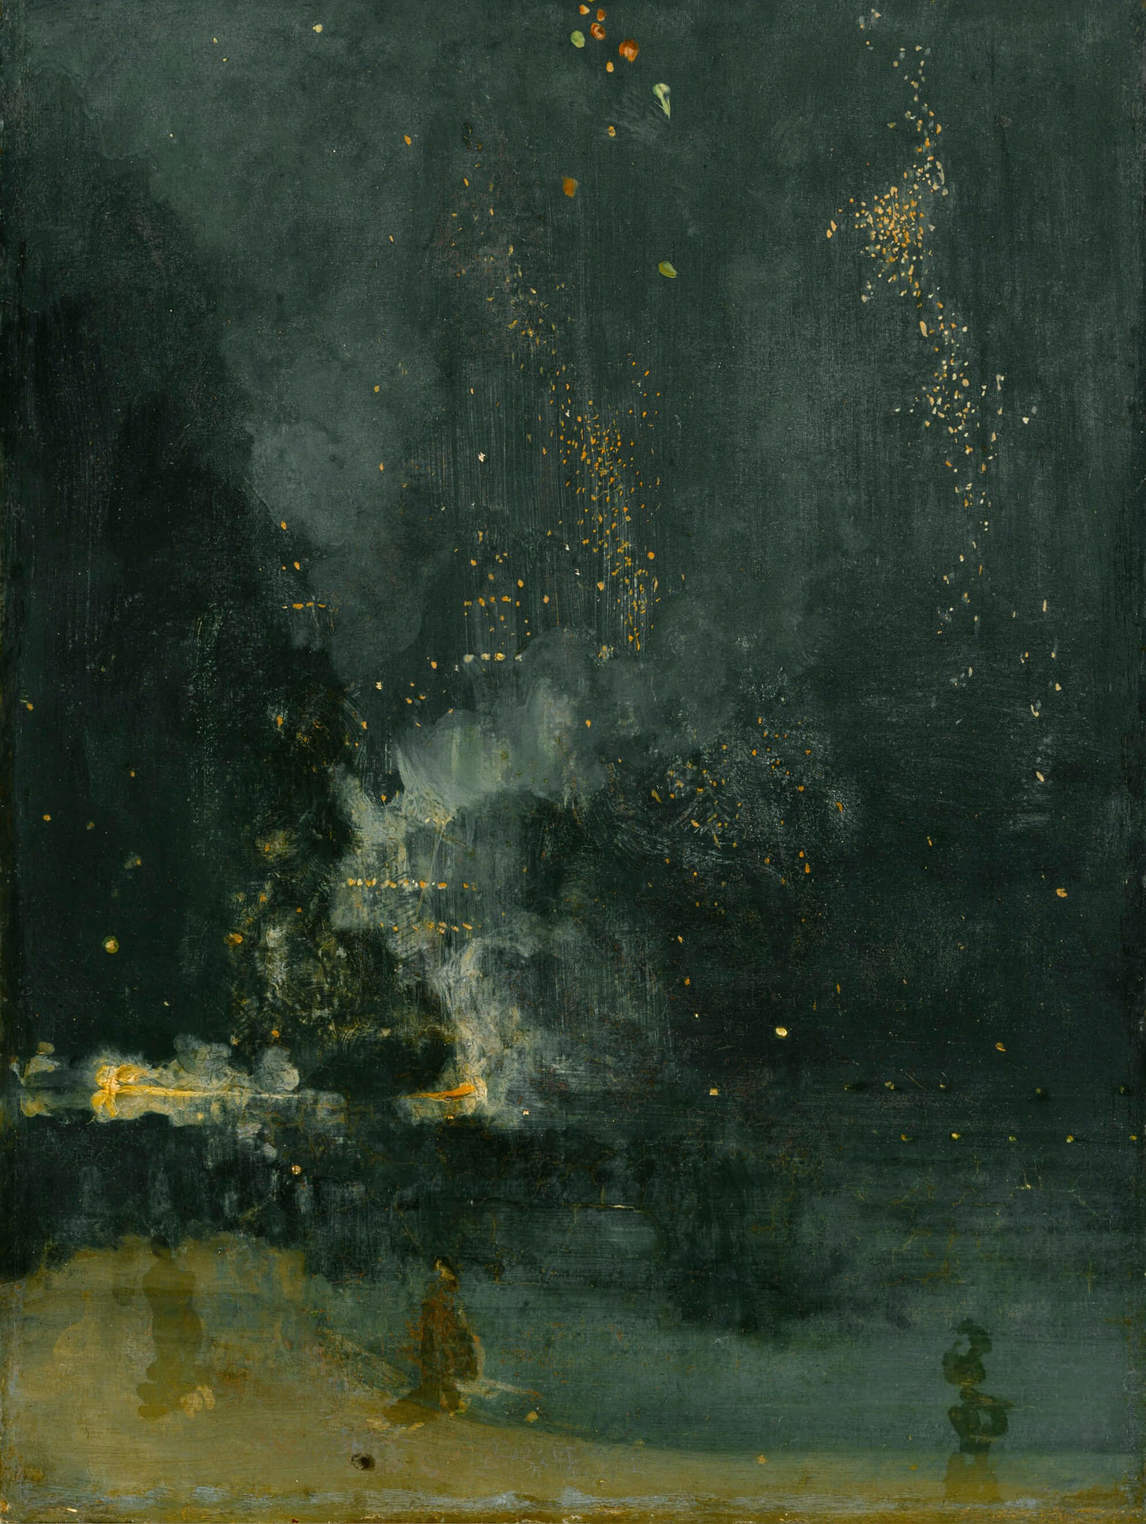 ames Abbott McNeill Whistler, Nocturne in Black and Gold, The Falling Rocket, c.1872–77